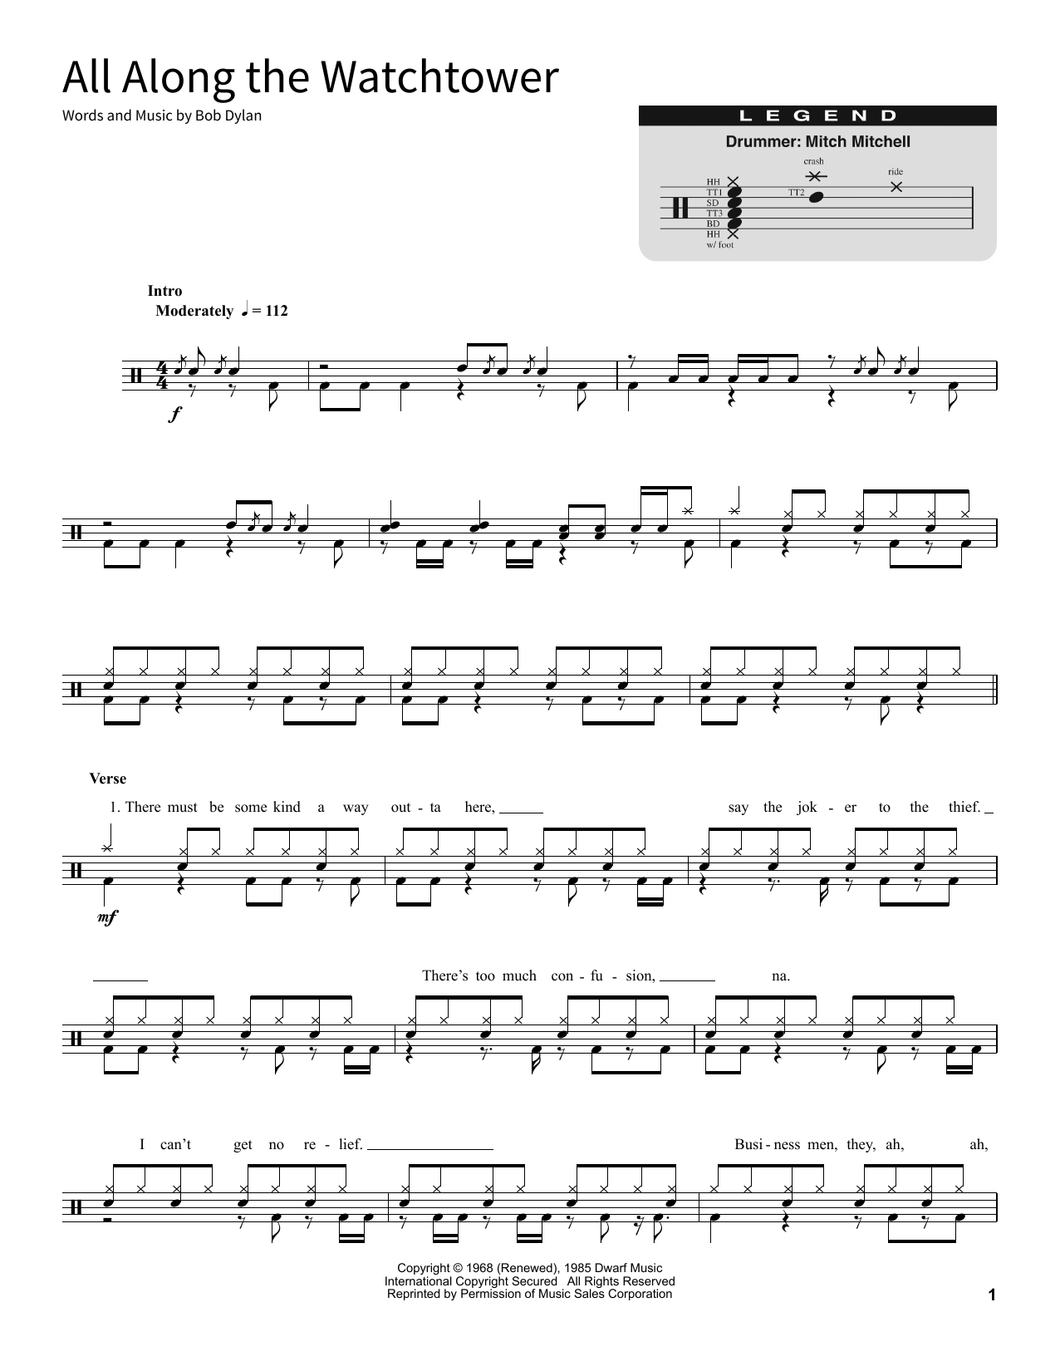 All Along the Watchtower - Bob Dylan - Full Drum Transcription / Drum Sheet Music - SheetMusicDirect SORD